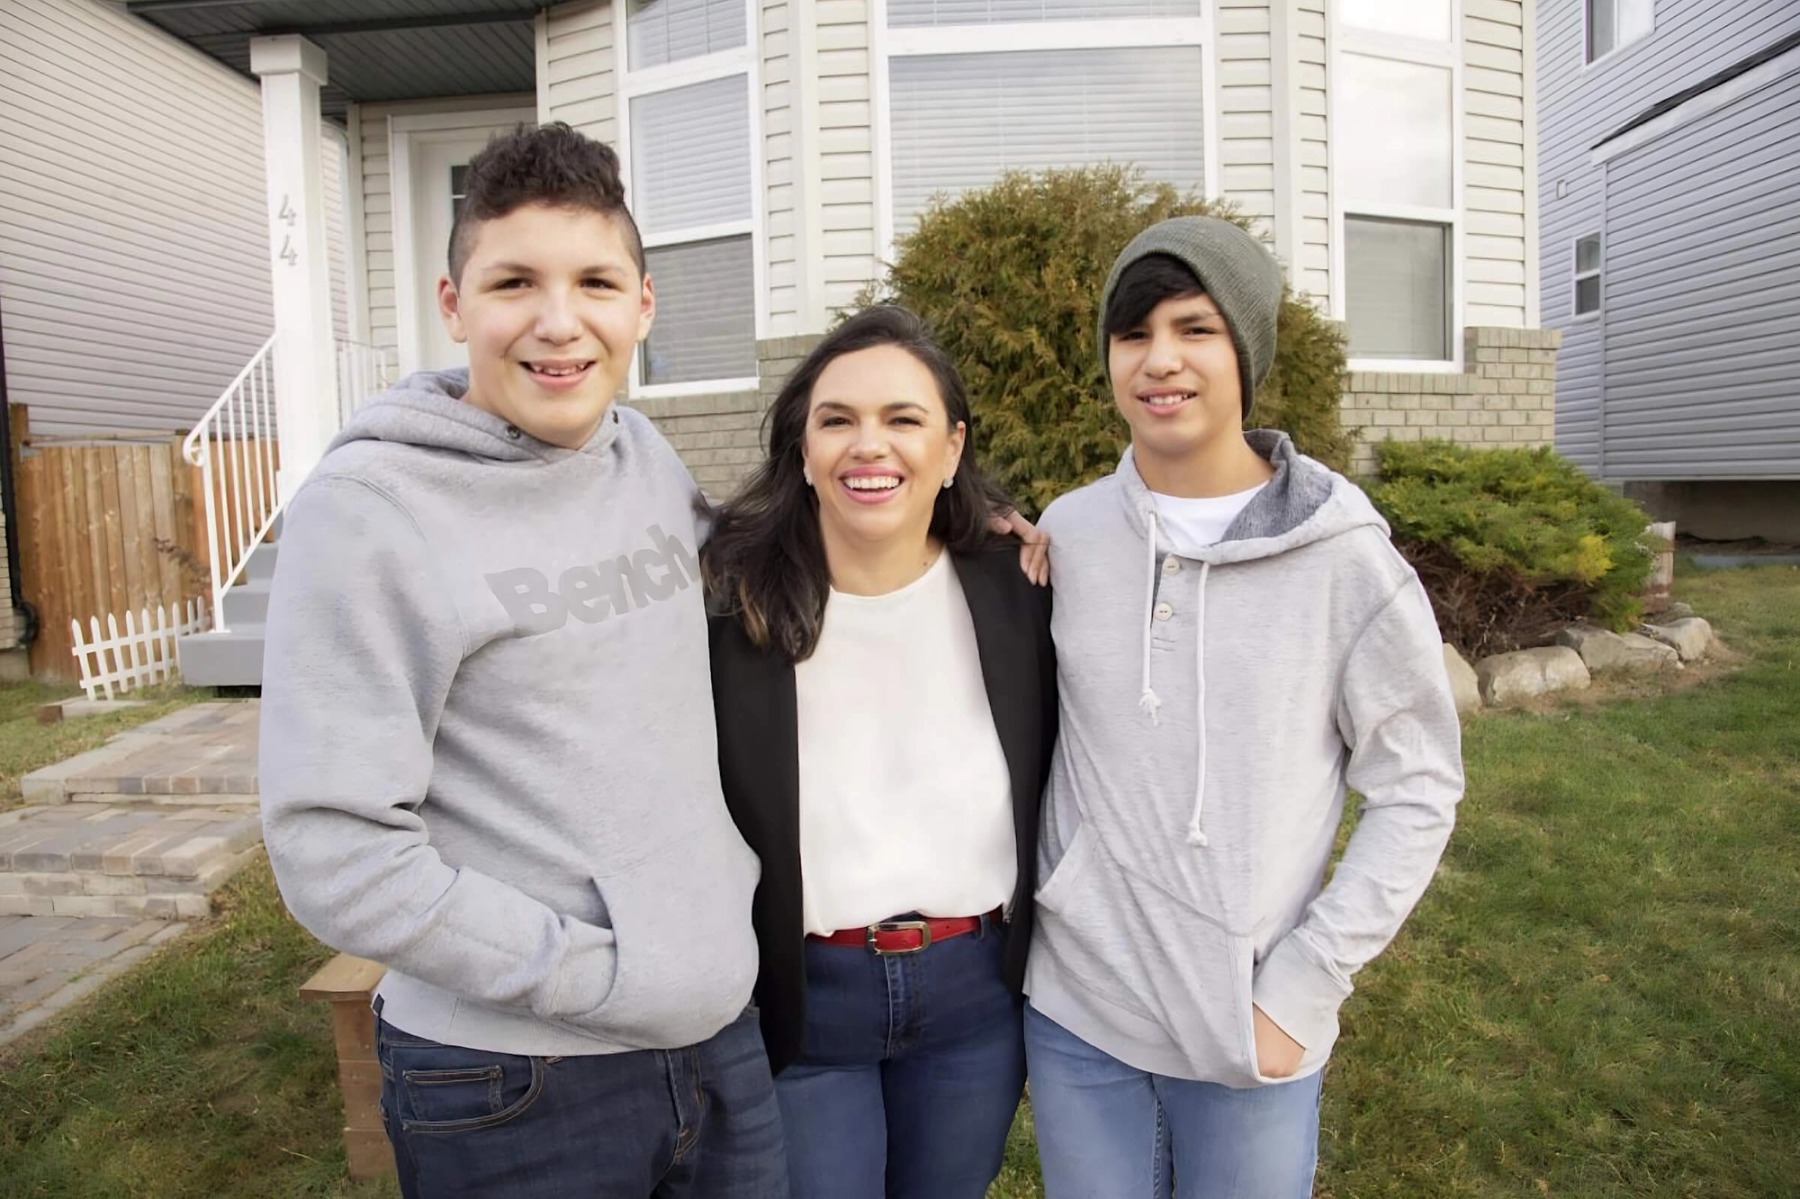 Rocio Martinez and her family stand in front of a home with green grass